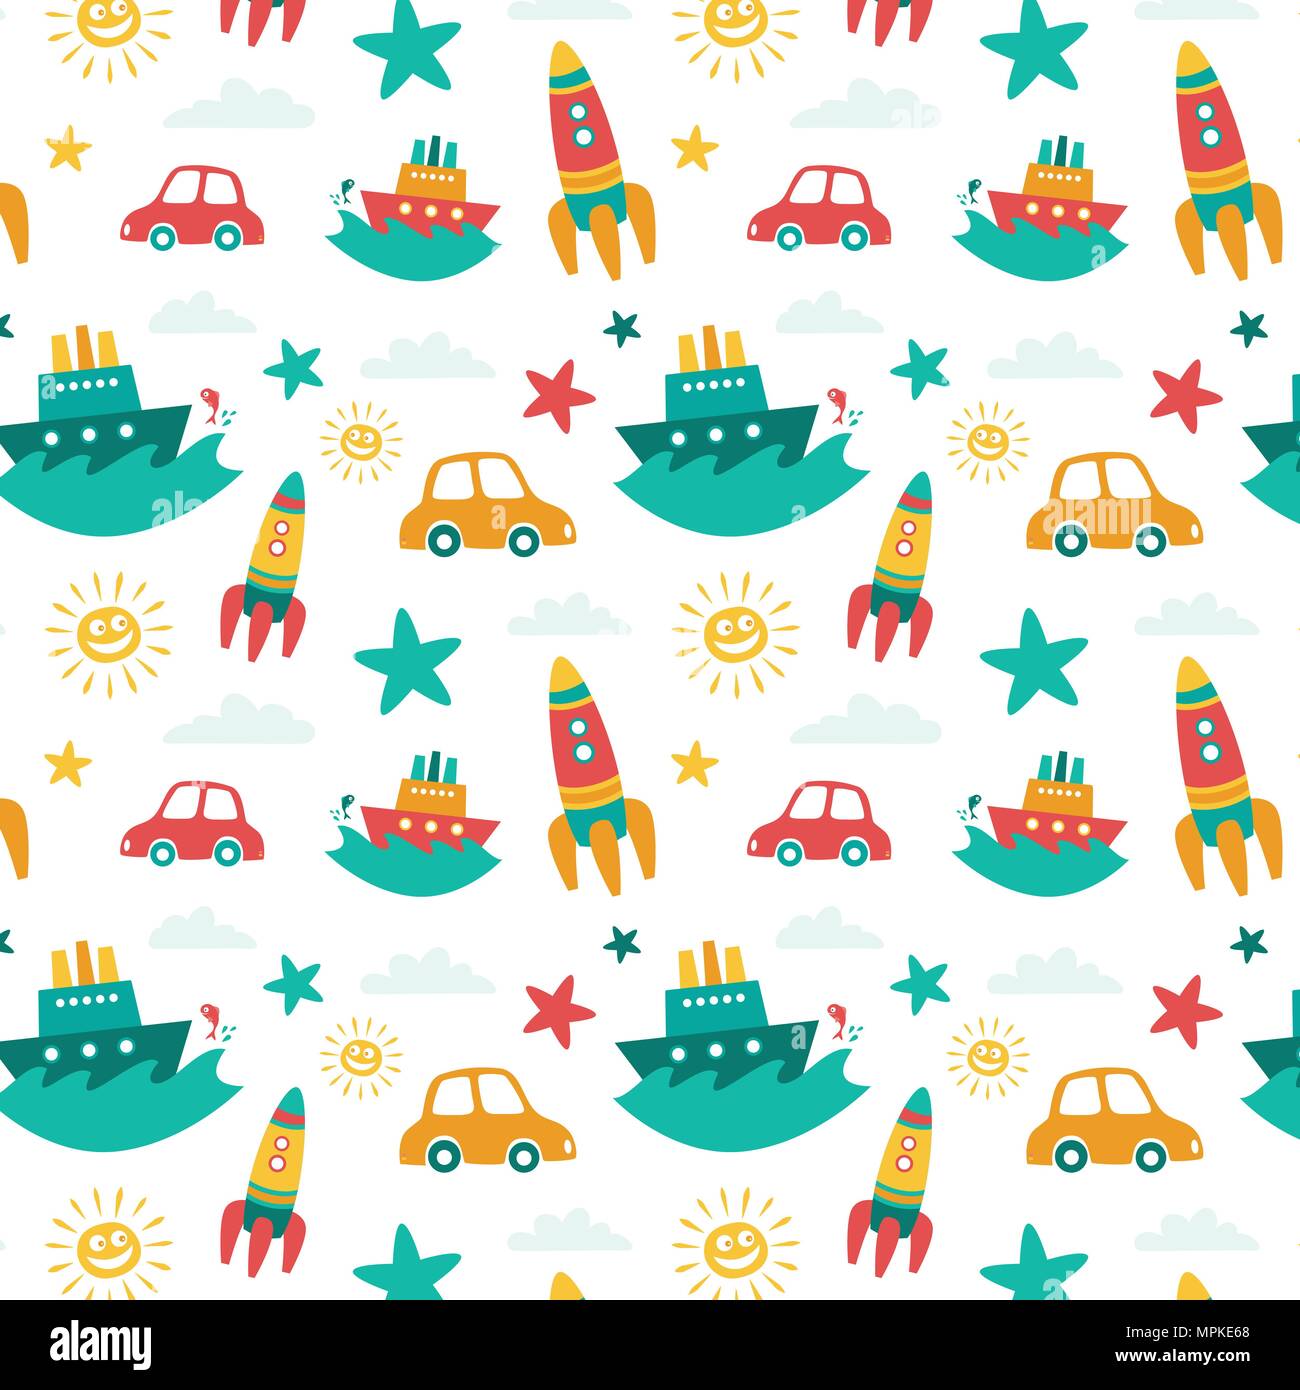 Cute vehicles colorful vector pattern for kids, suitable for children room Stock Vector